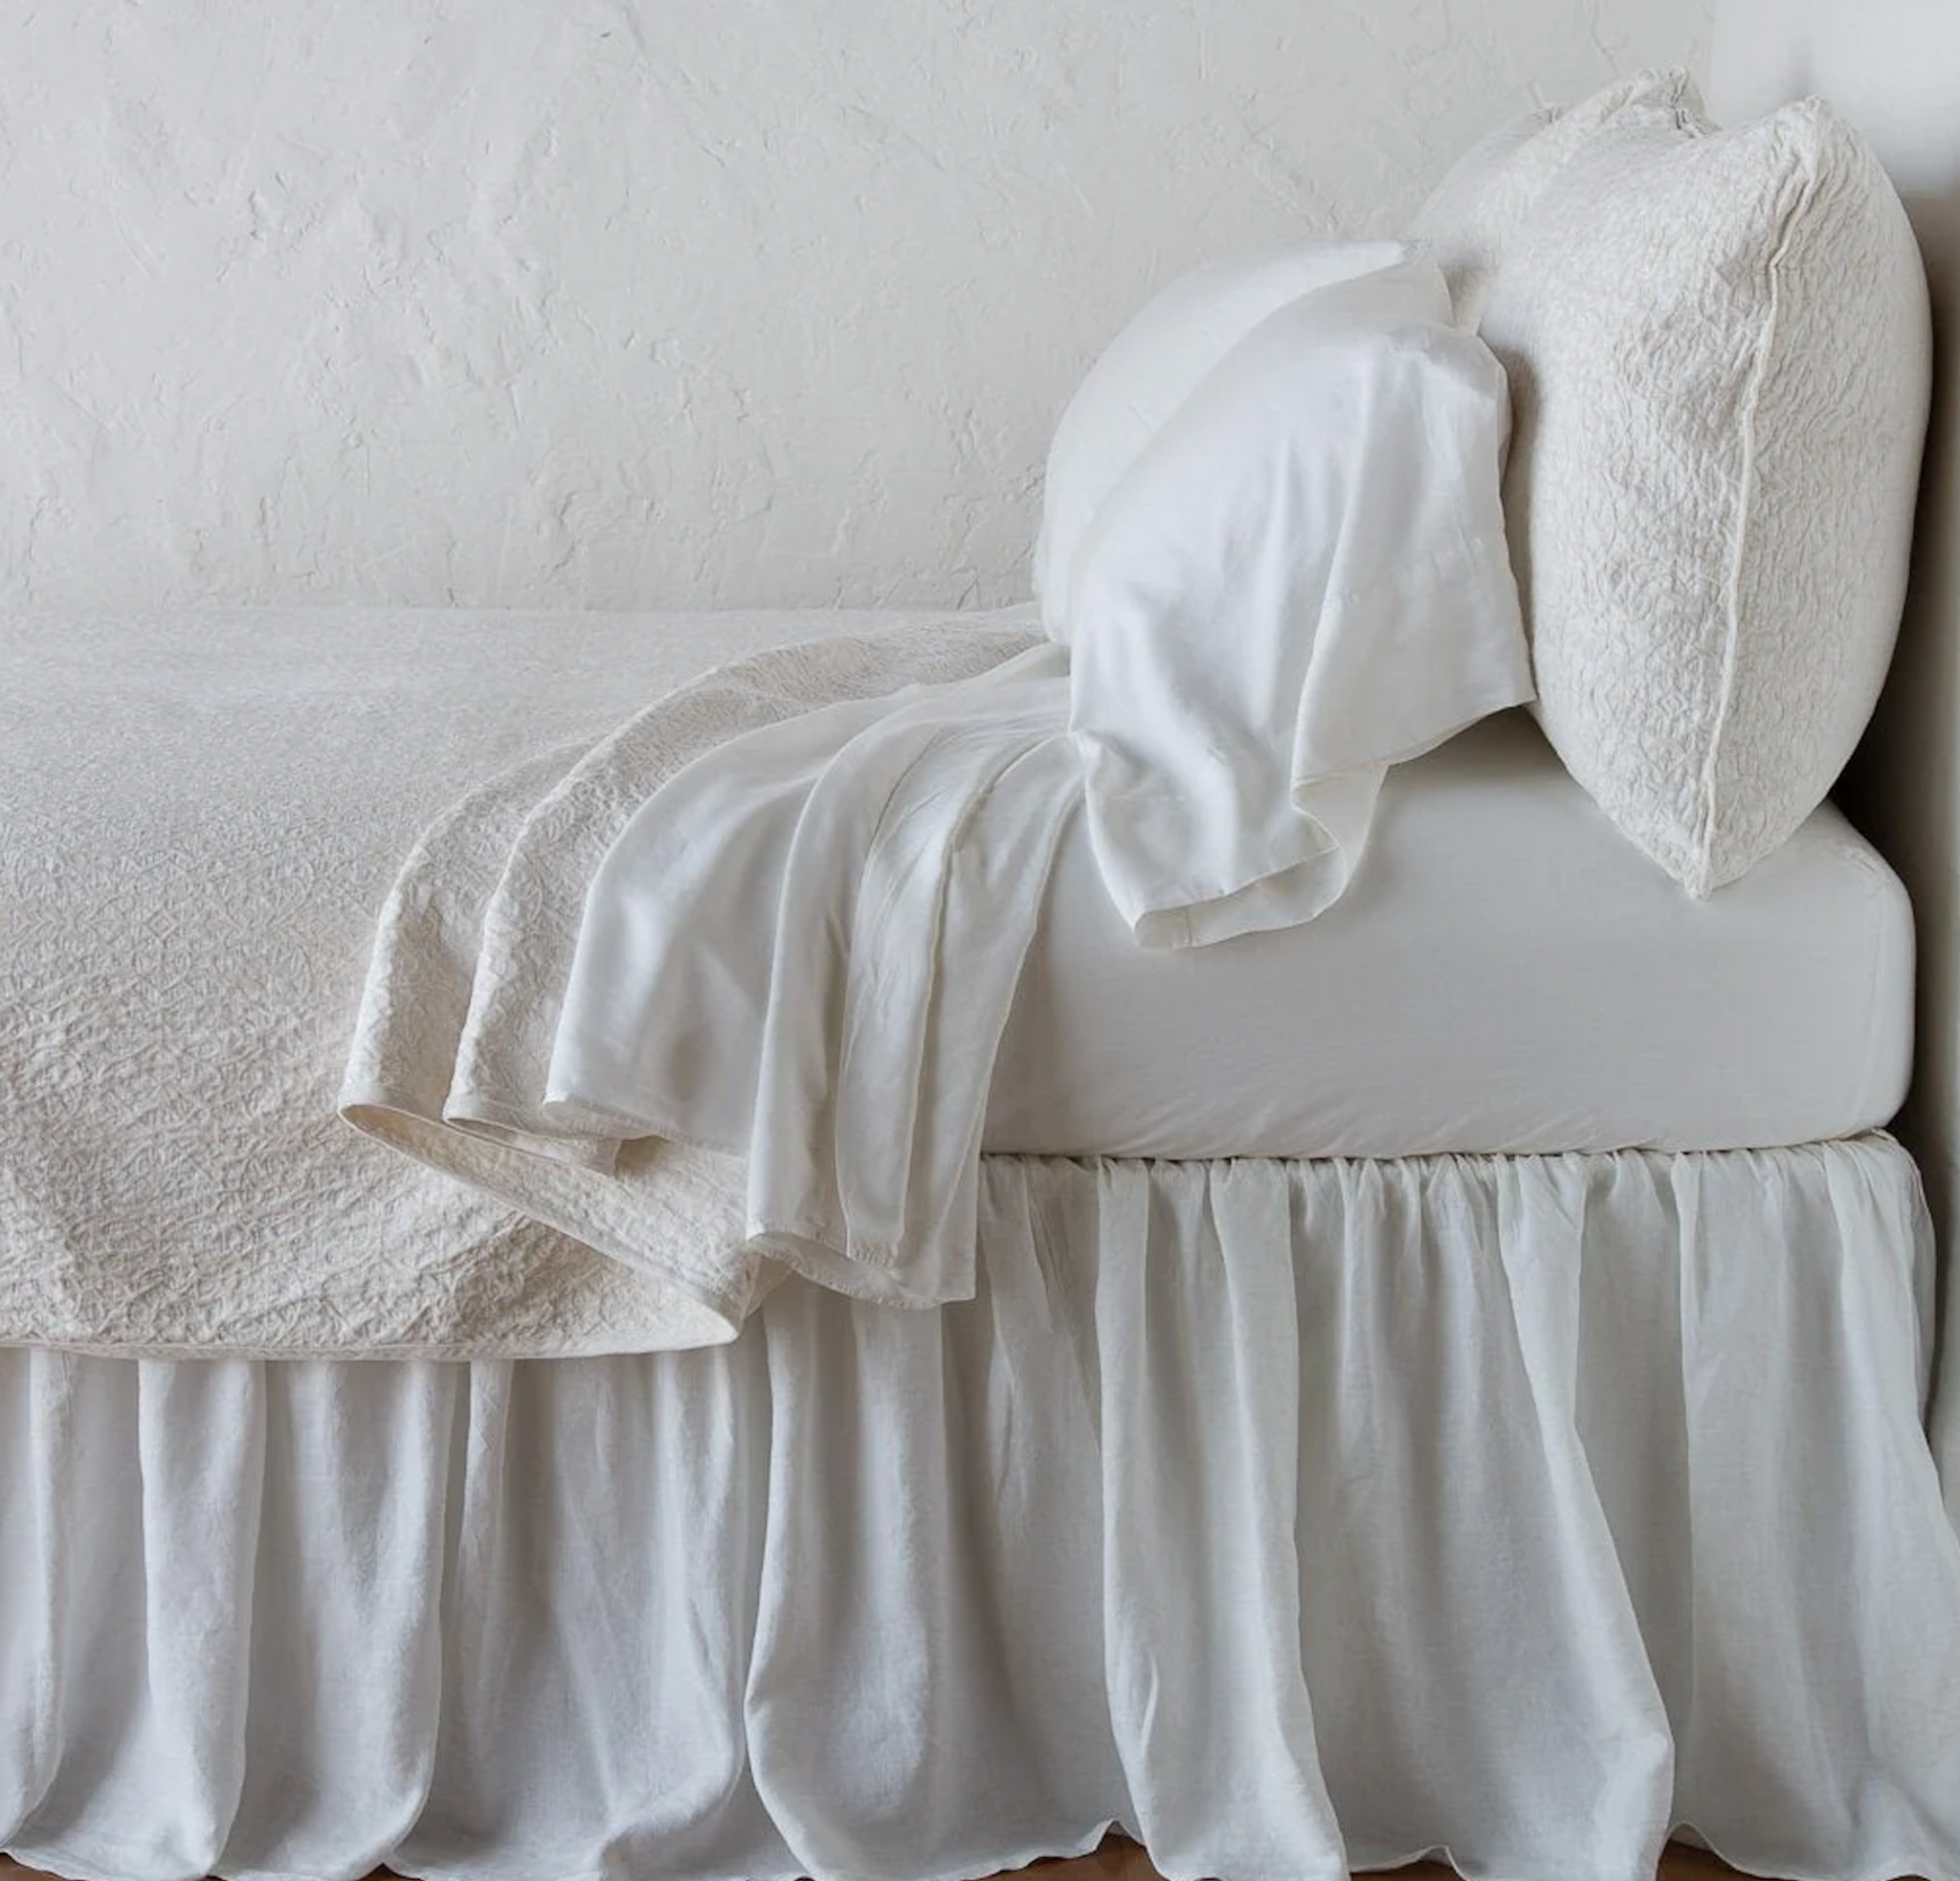 Vienna Winter White coverlets by Bella Notte